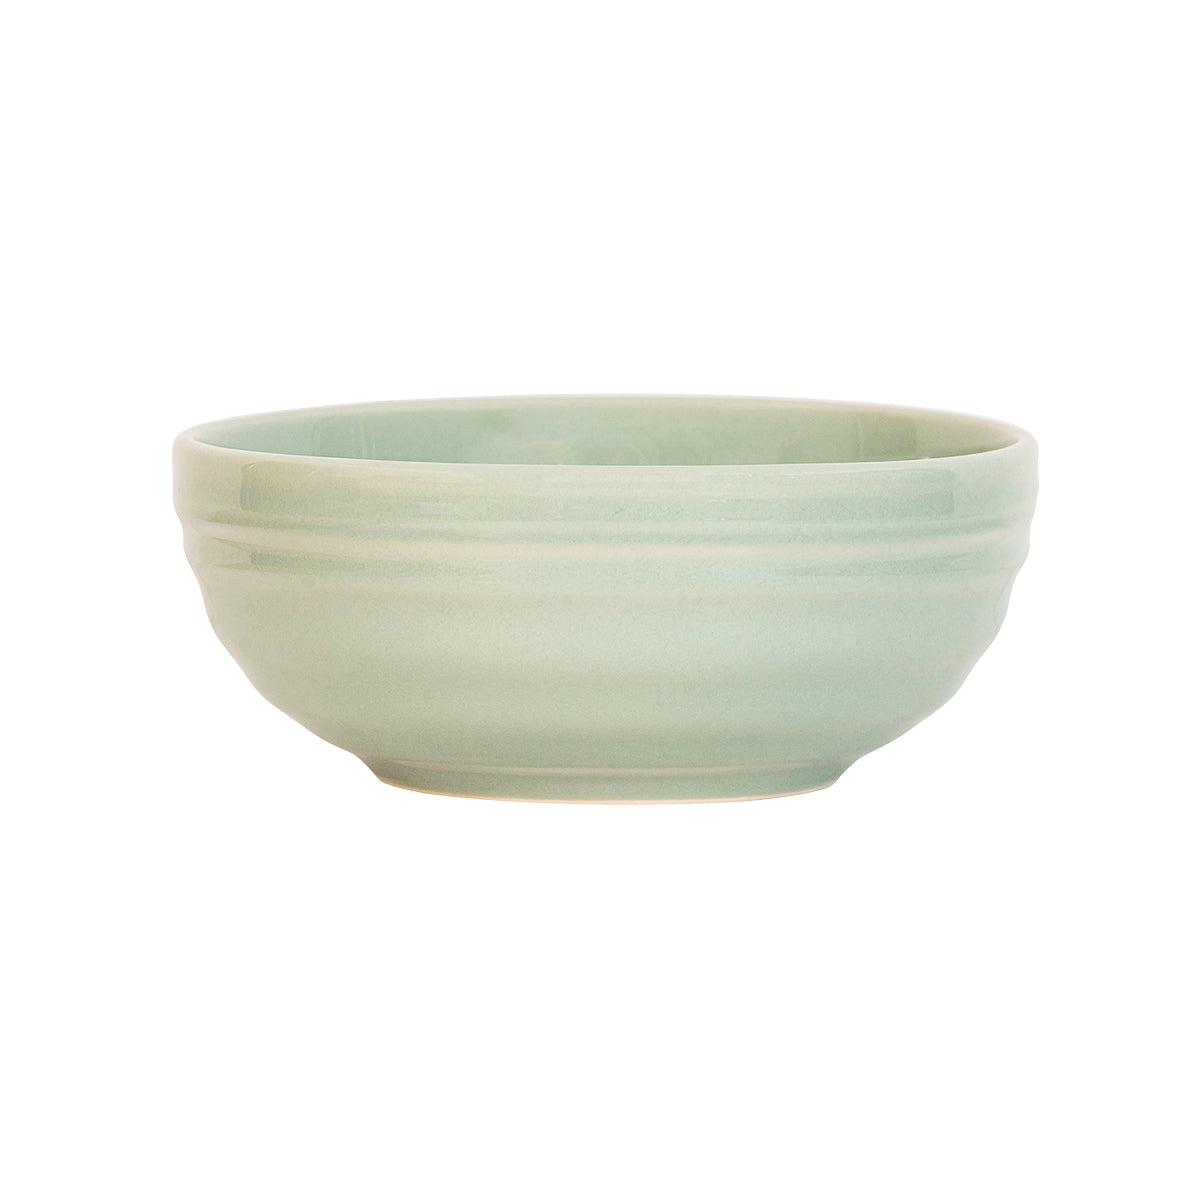 From our Bilbao Collection - The hand-hewn texture and gorgeous green glaze of this classic bowl pairs perfectly with everything from mint chip ice cream at midnight to gazpacho on a summer’s day. 